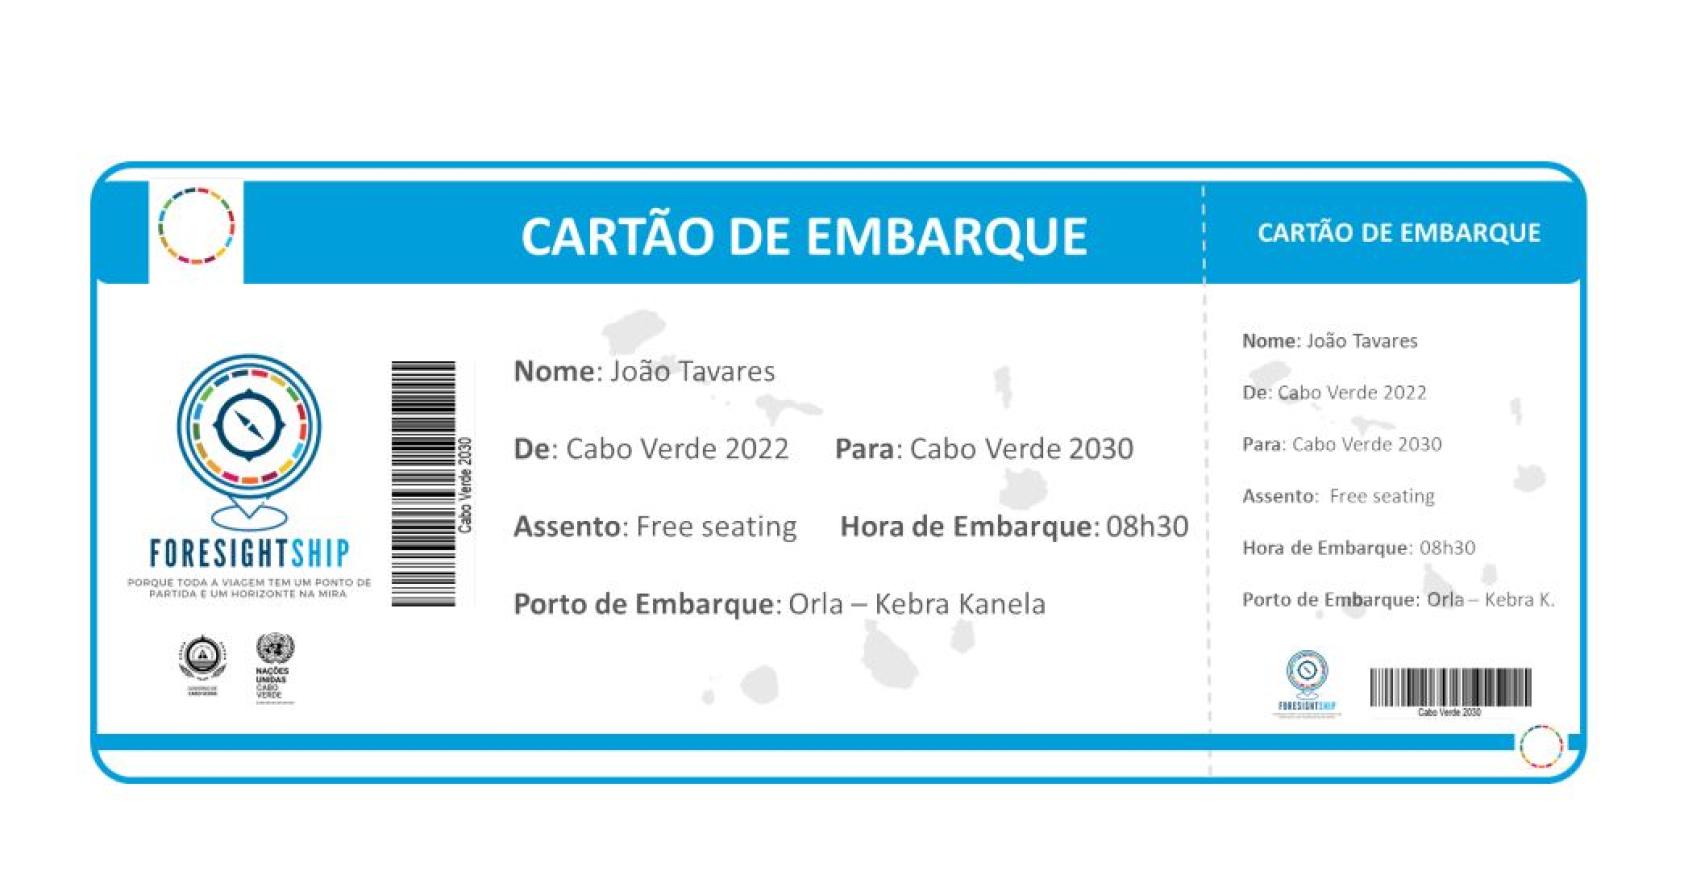 The mysterious boarding pass to a cruise into the future.